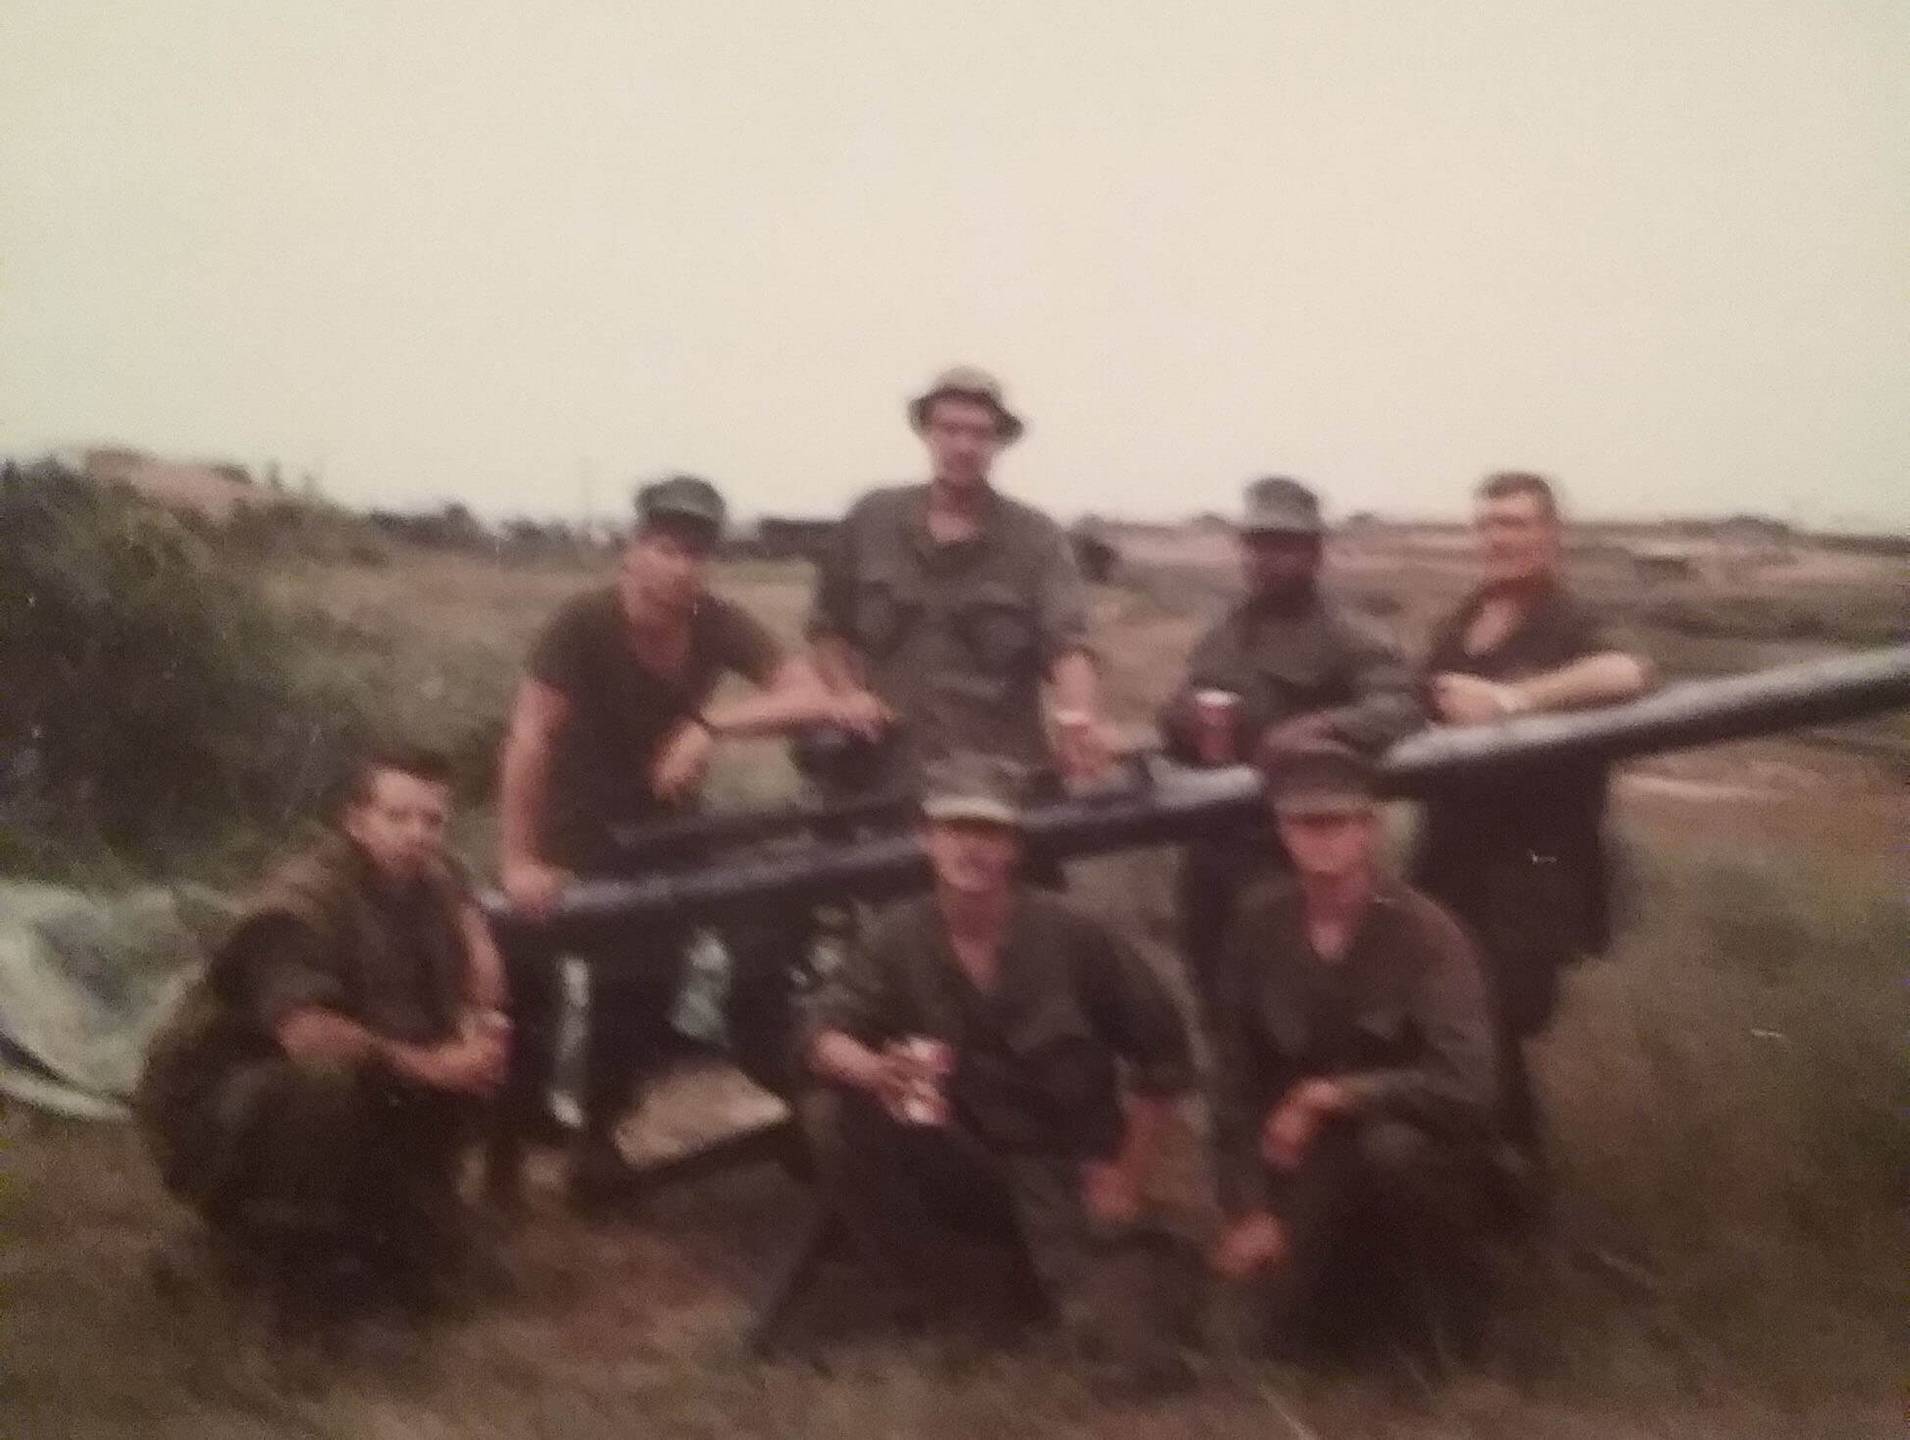 Group of U.S. soldiers with a very large rifle.